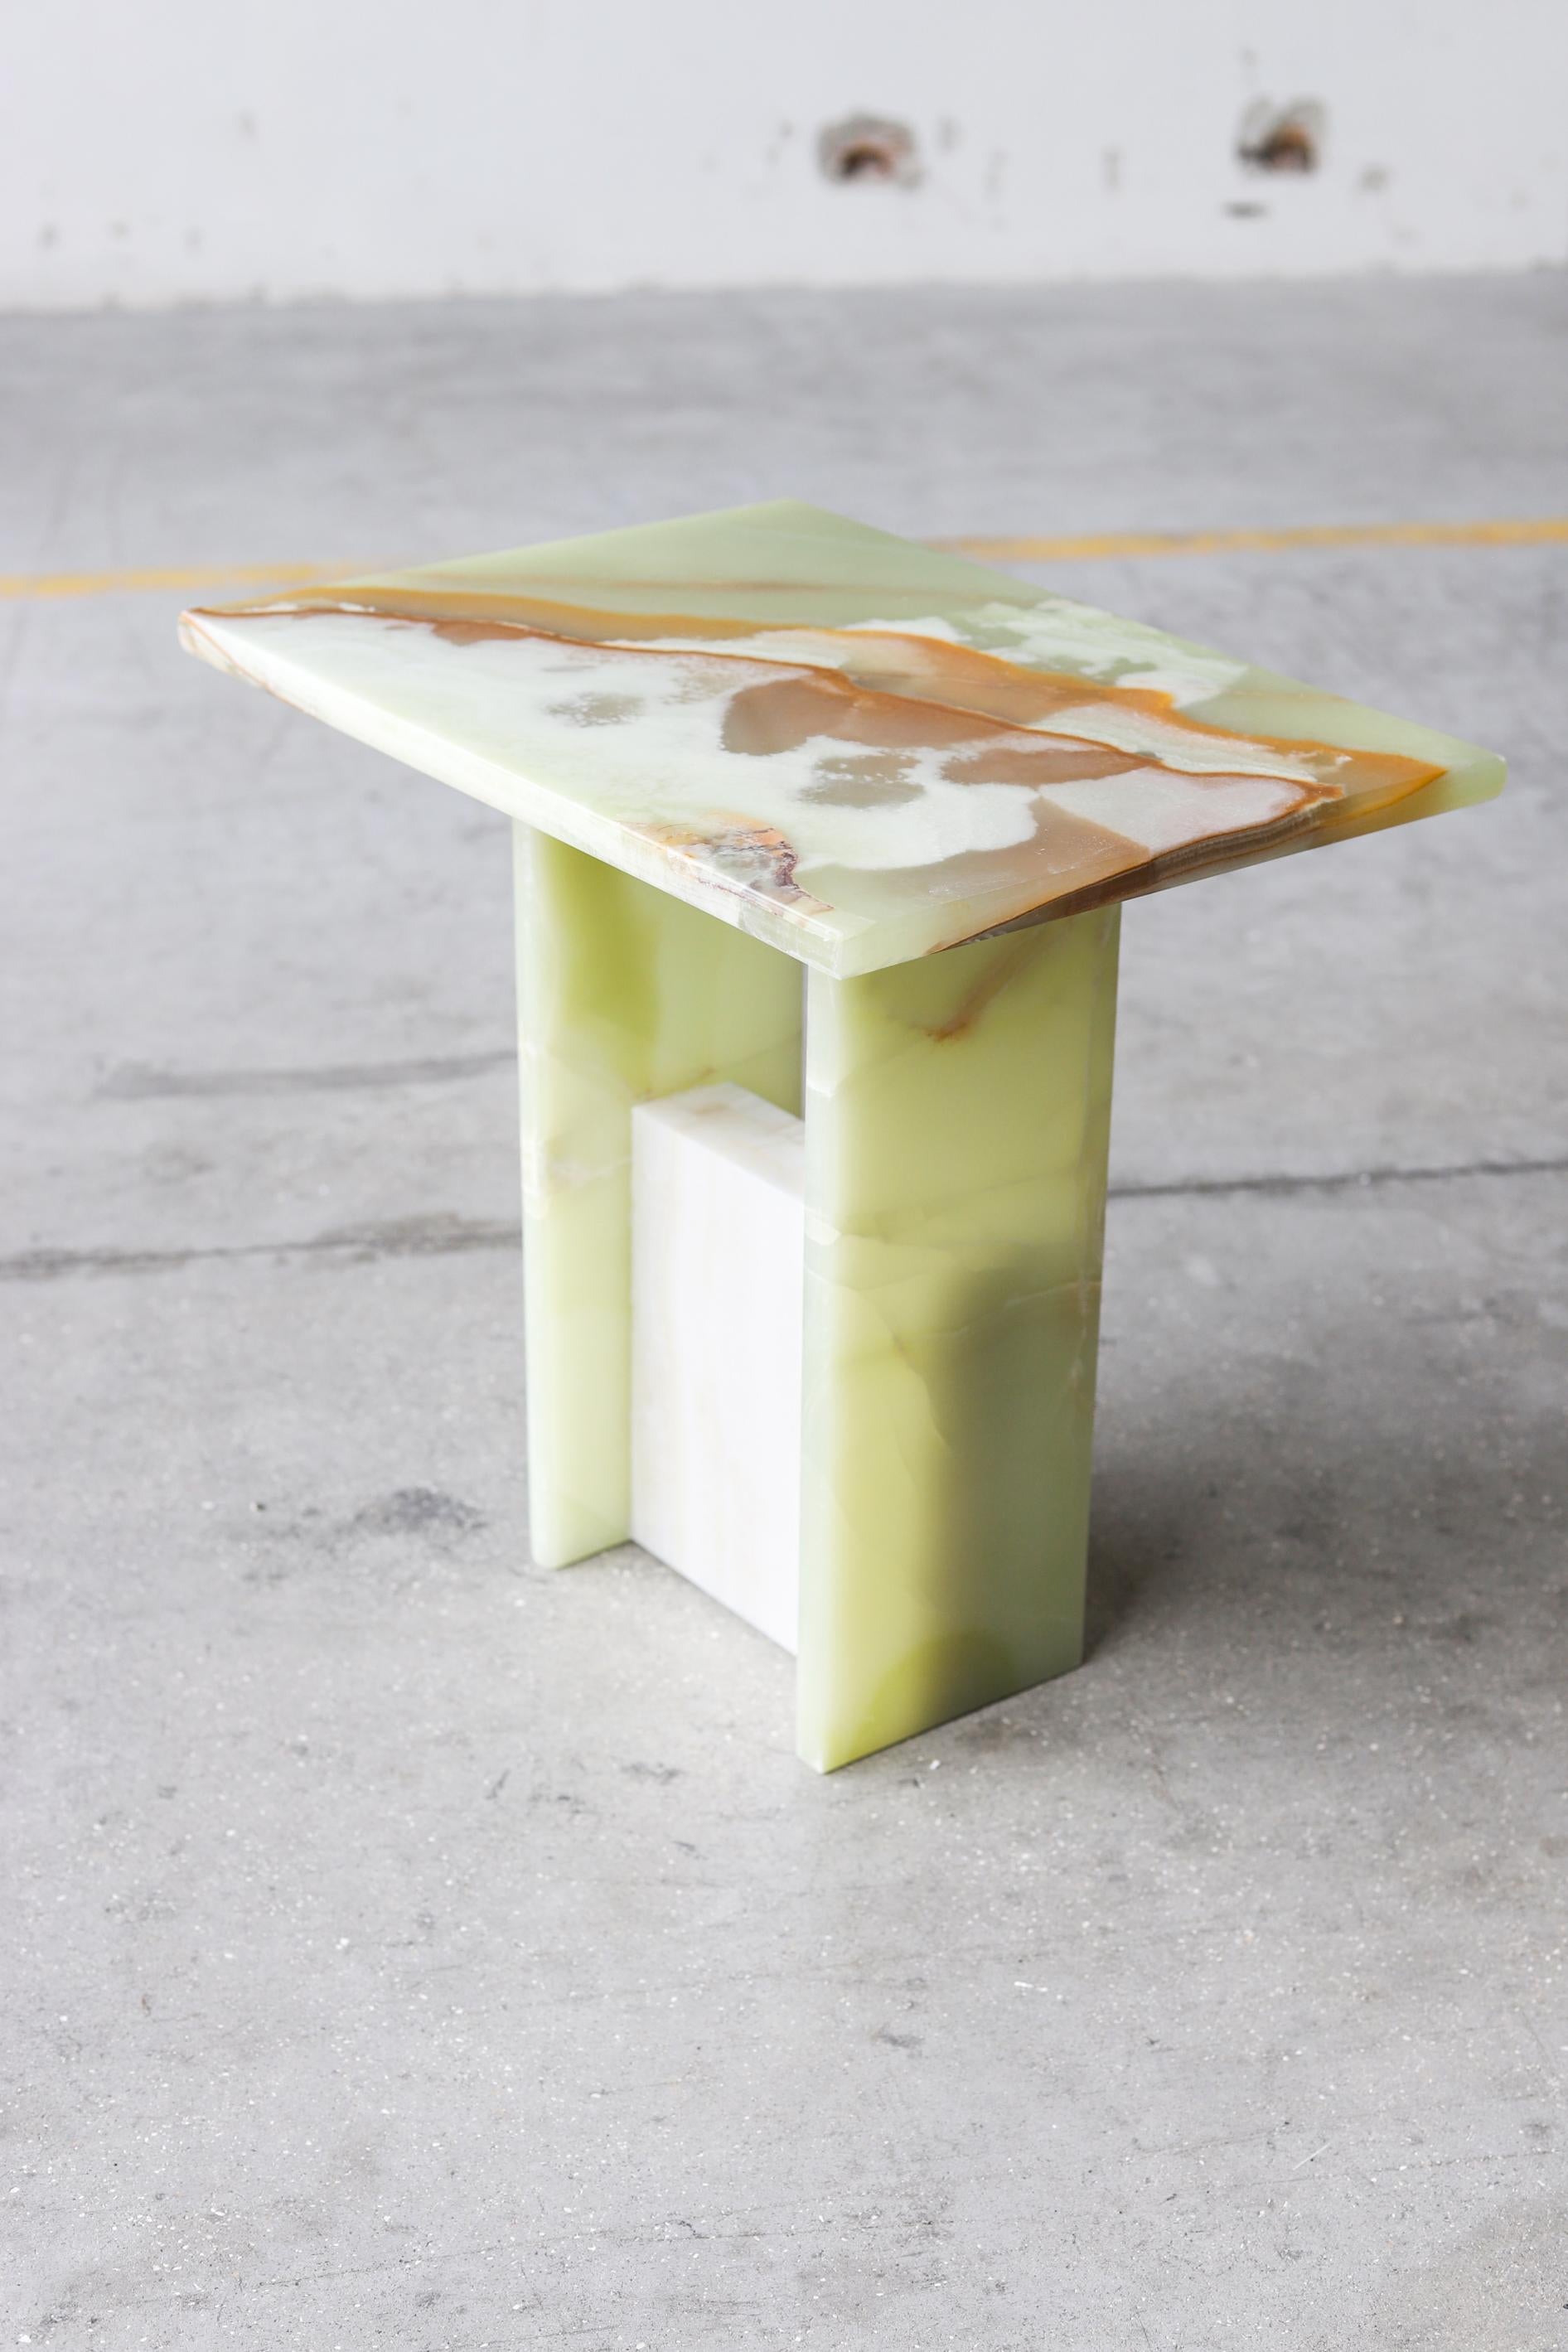 SST016-2 side table by Stone Stackers
Limited Edition of 5 products.
Dimensions: W 48 x D 35 x H 46 cm.
Materials: Marble base: Onyx ivory, marble structure: Onyx Jade green.
Weight: 27 kg.

This side table is part of a set of two pieces. It